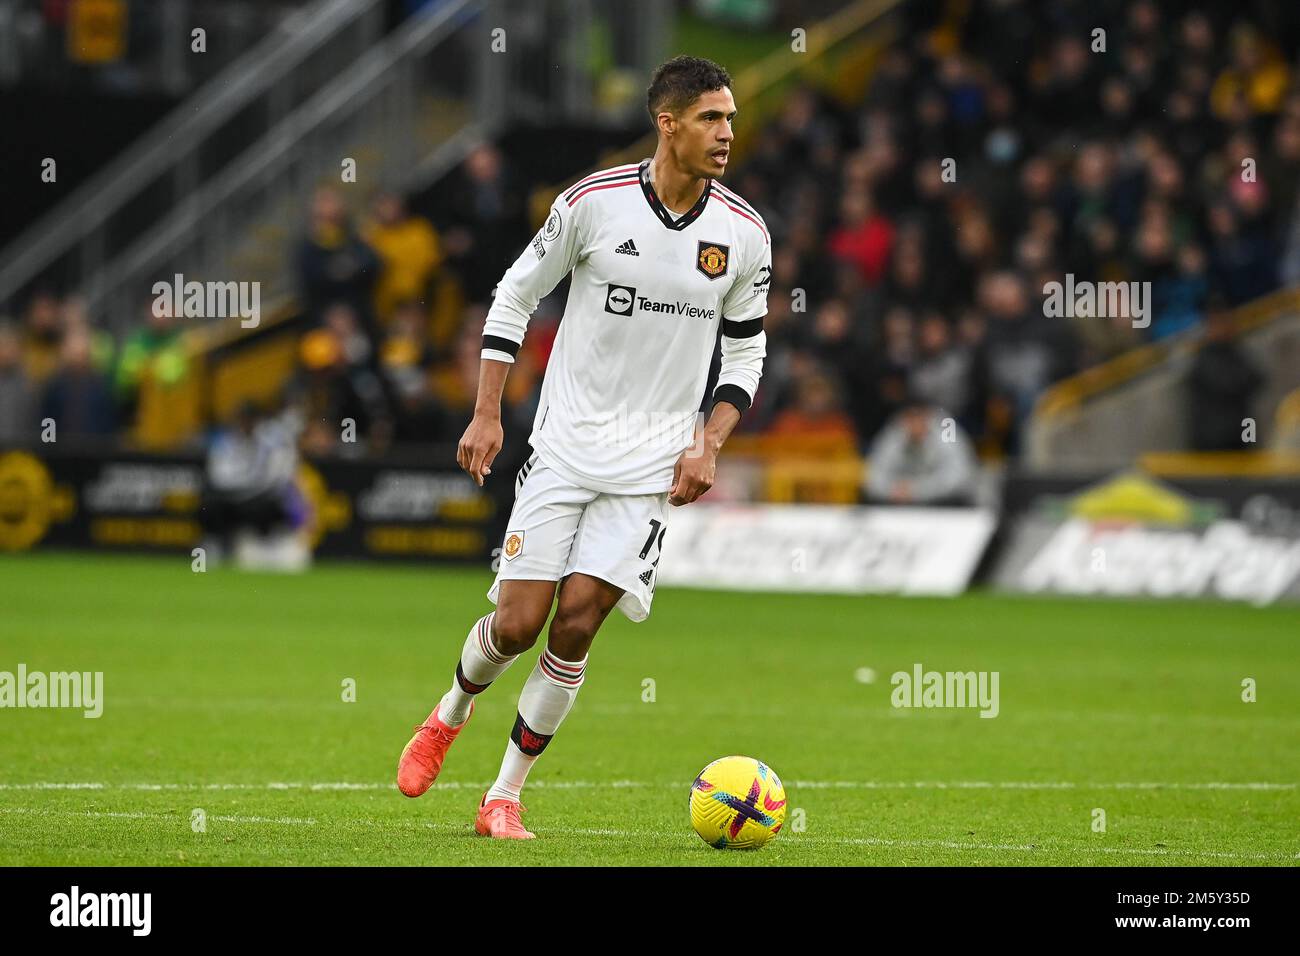 Raphael Varane #19 of Manchester United in action during the Premier League  match Wolverhampton Wanderers vs Manchester United at Molineux,  Wolverhampton, United Kingdom, 31st December 2022 (Photo by Craig  Thomas/News Images Stock